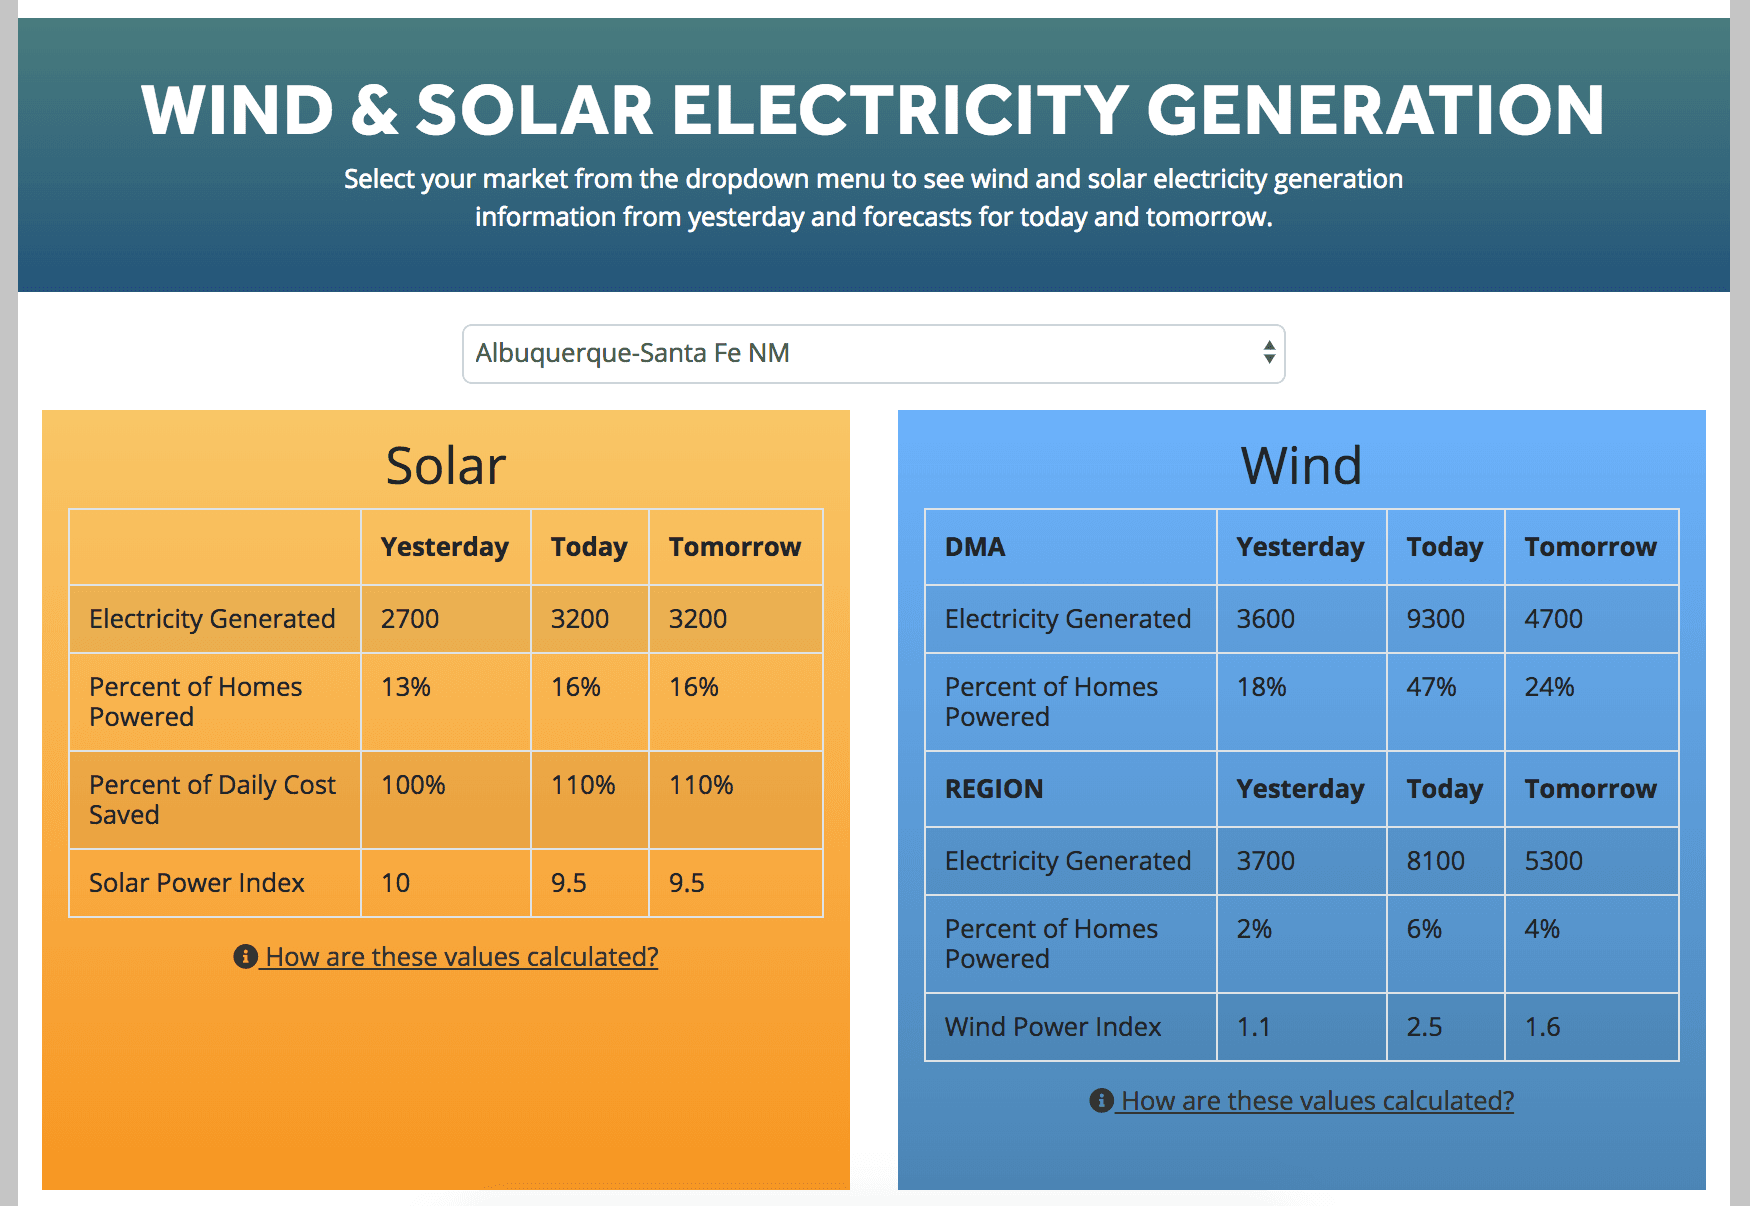 The Wind and Solar Forecast Tool